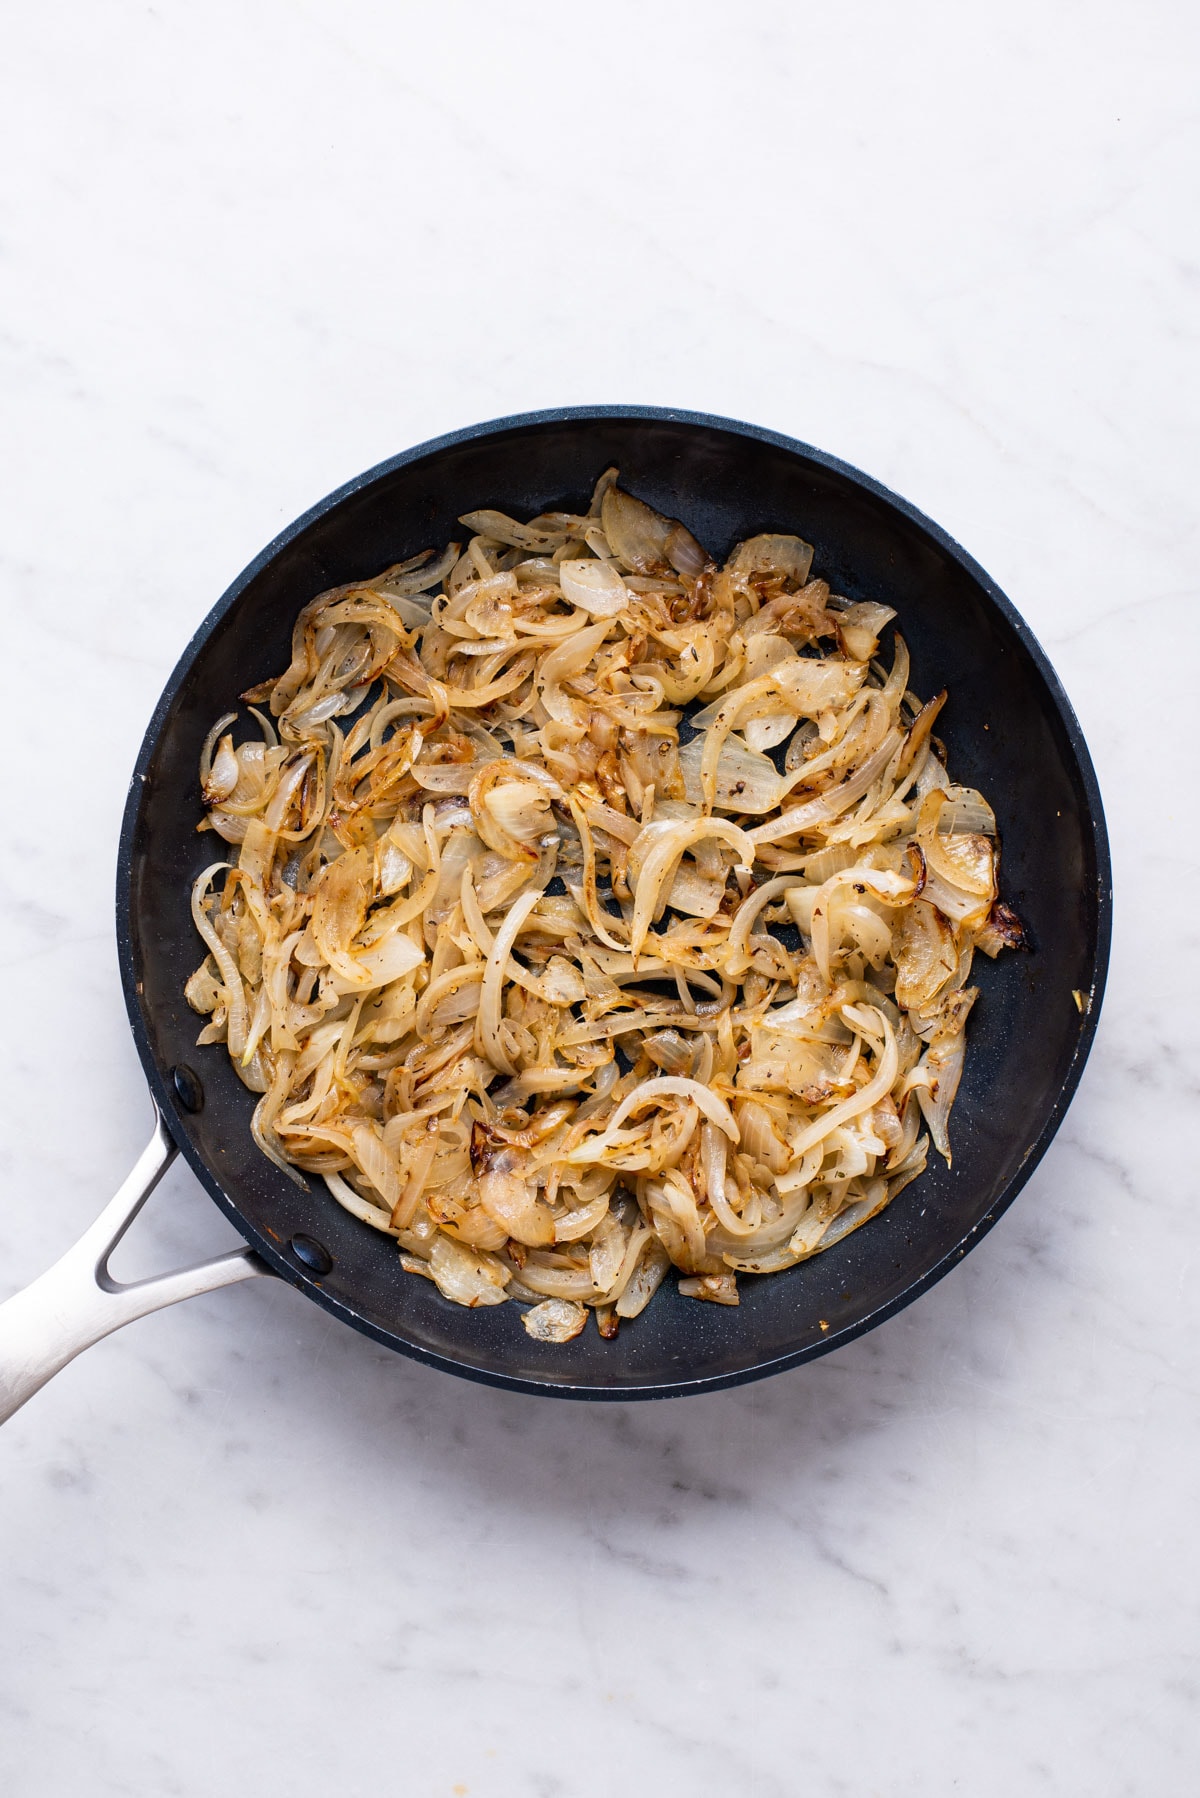 Caramelized onions in a skillet.